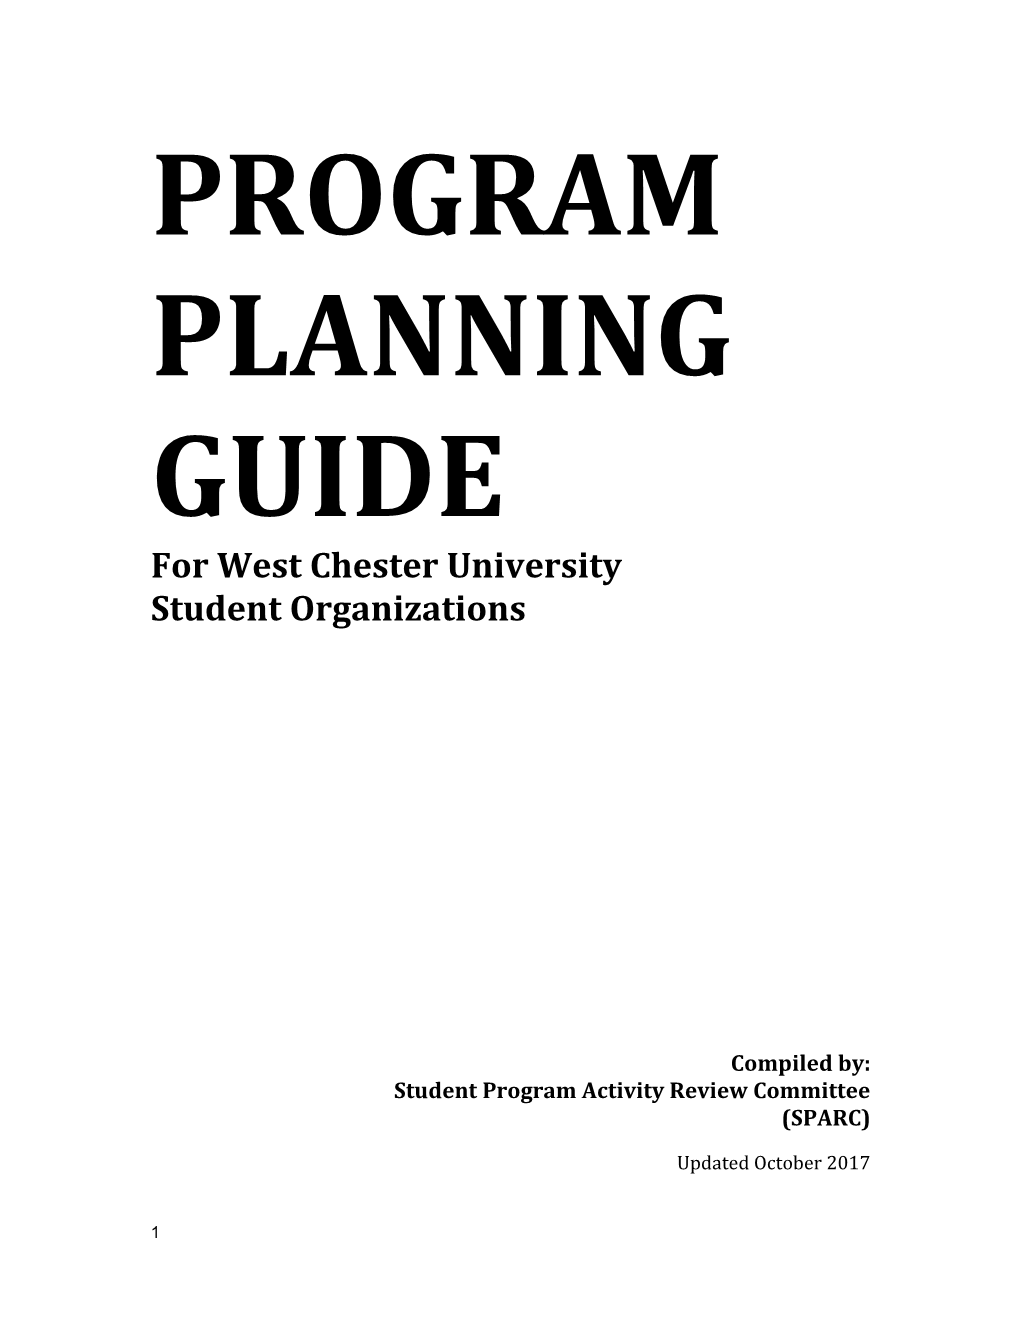 WELCOME to the Program Planning Guide